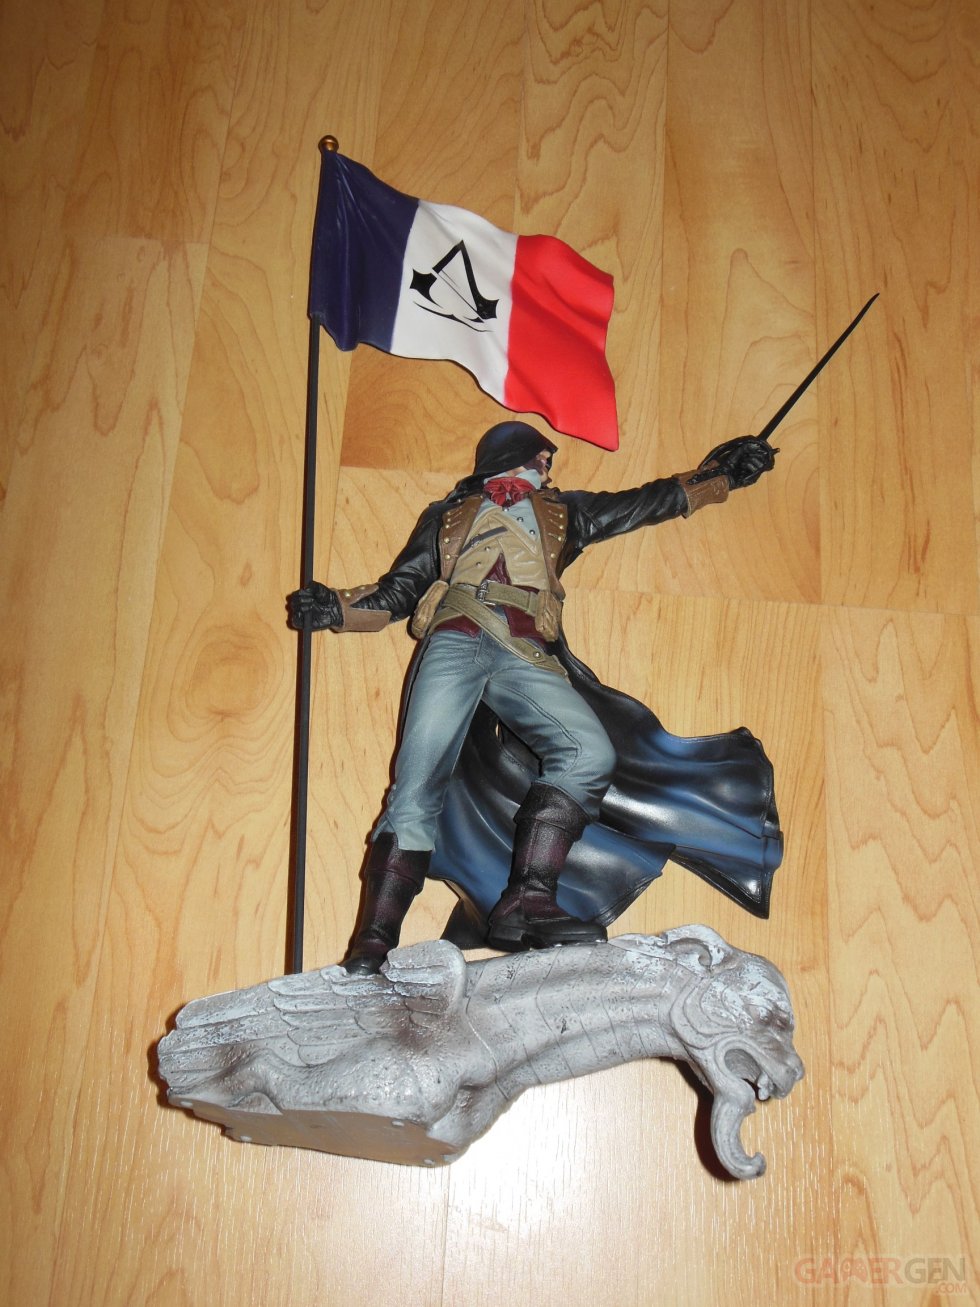 assassin-creed-unity-unboxing-deballage-photo-gamer-gen-collector-us-canada-americain-12